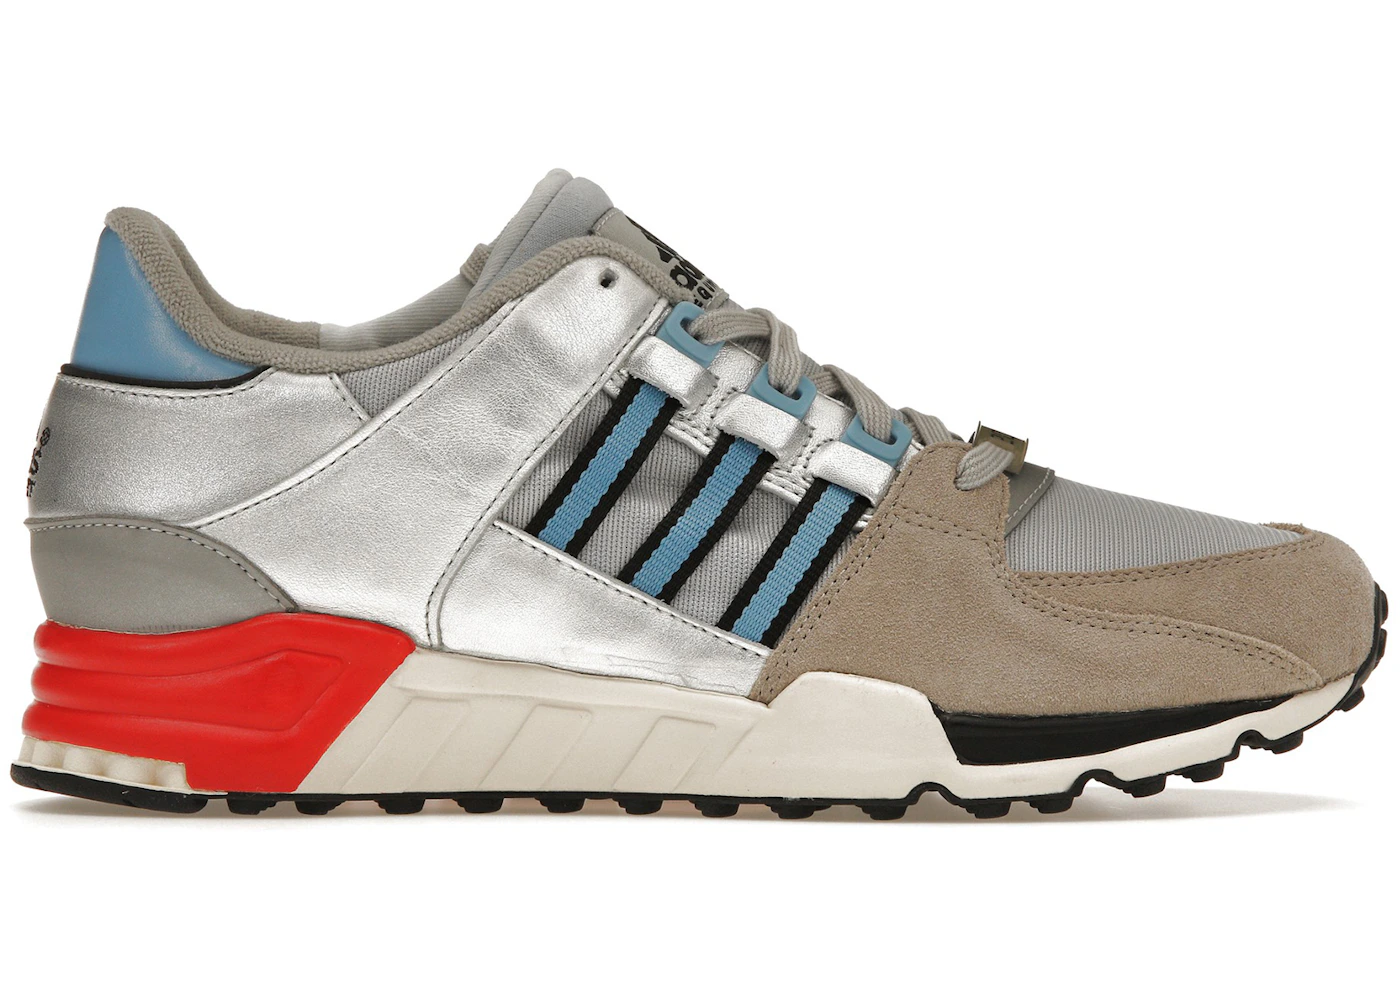 adidas EQT Running Support Packer Shoes Micropacer - C77363 - US